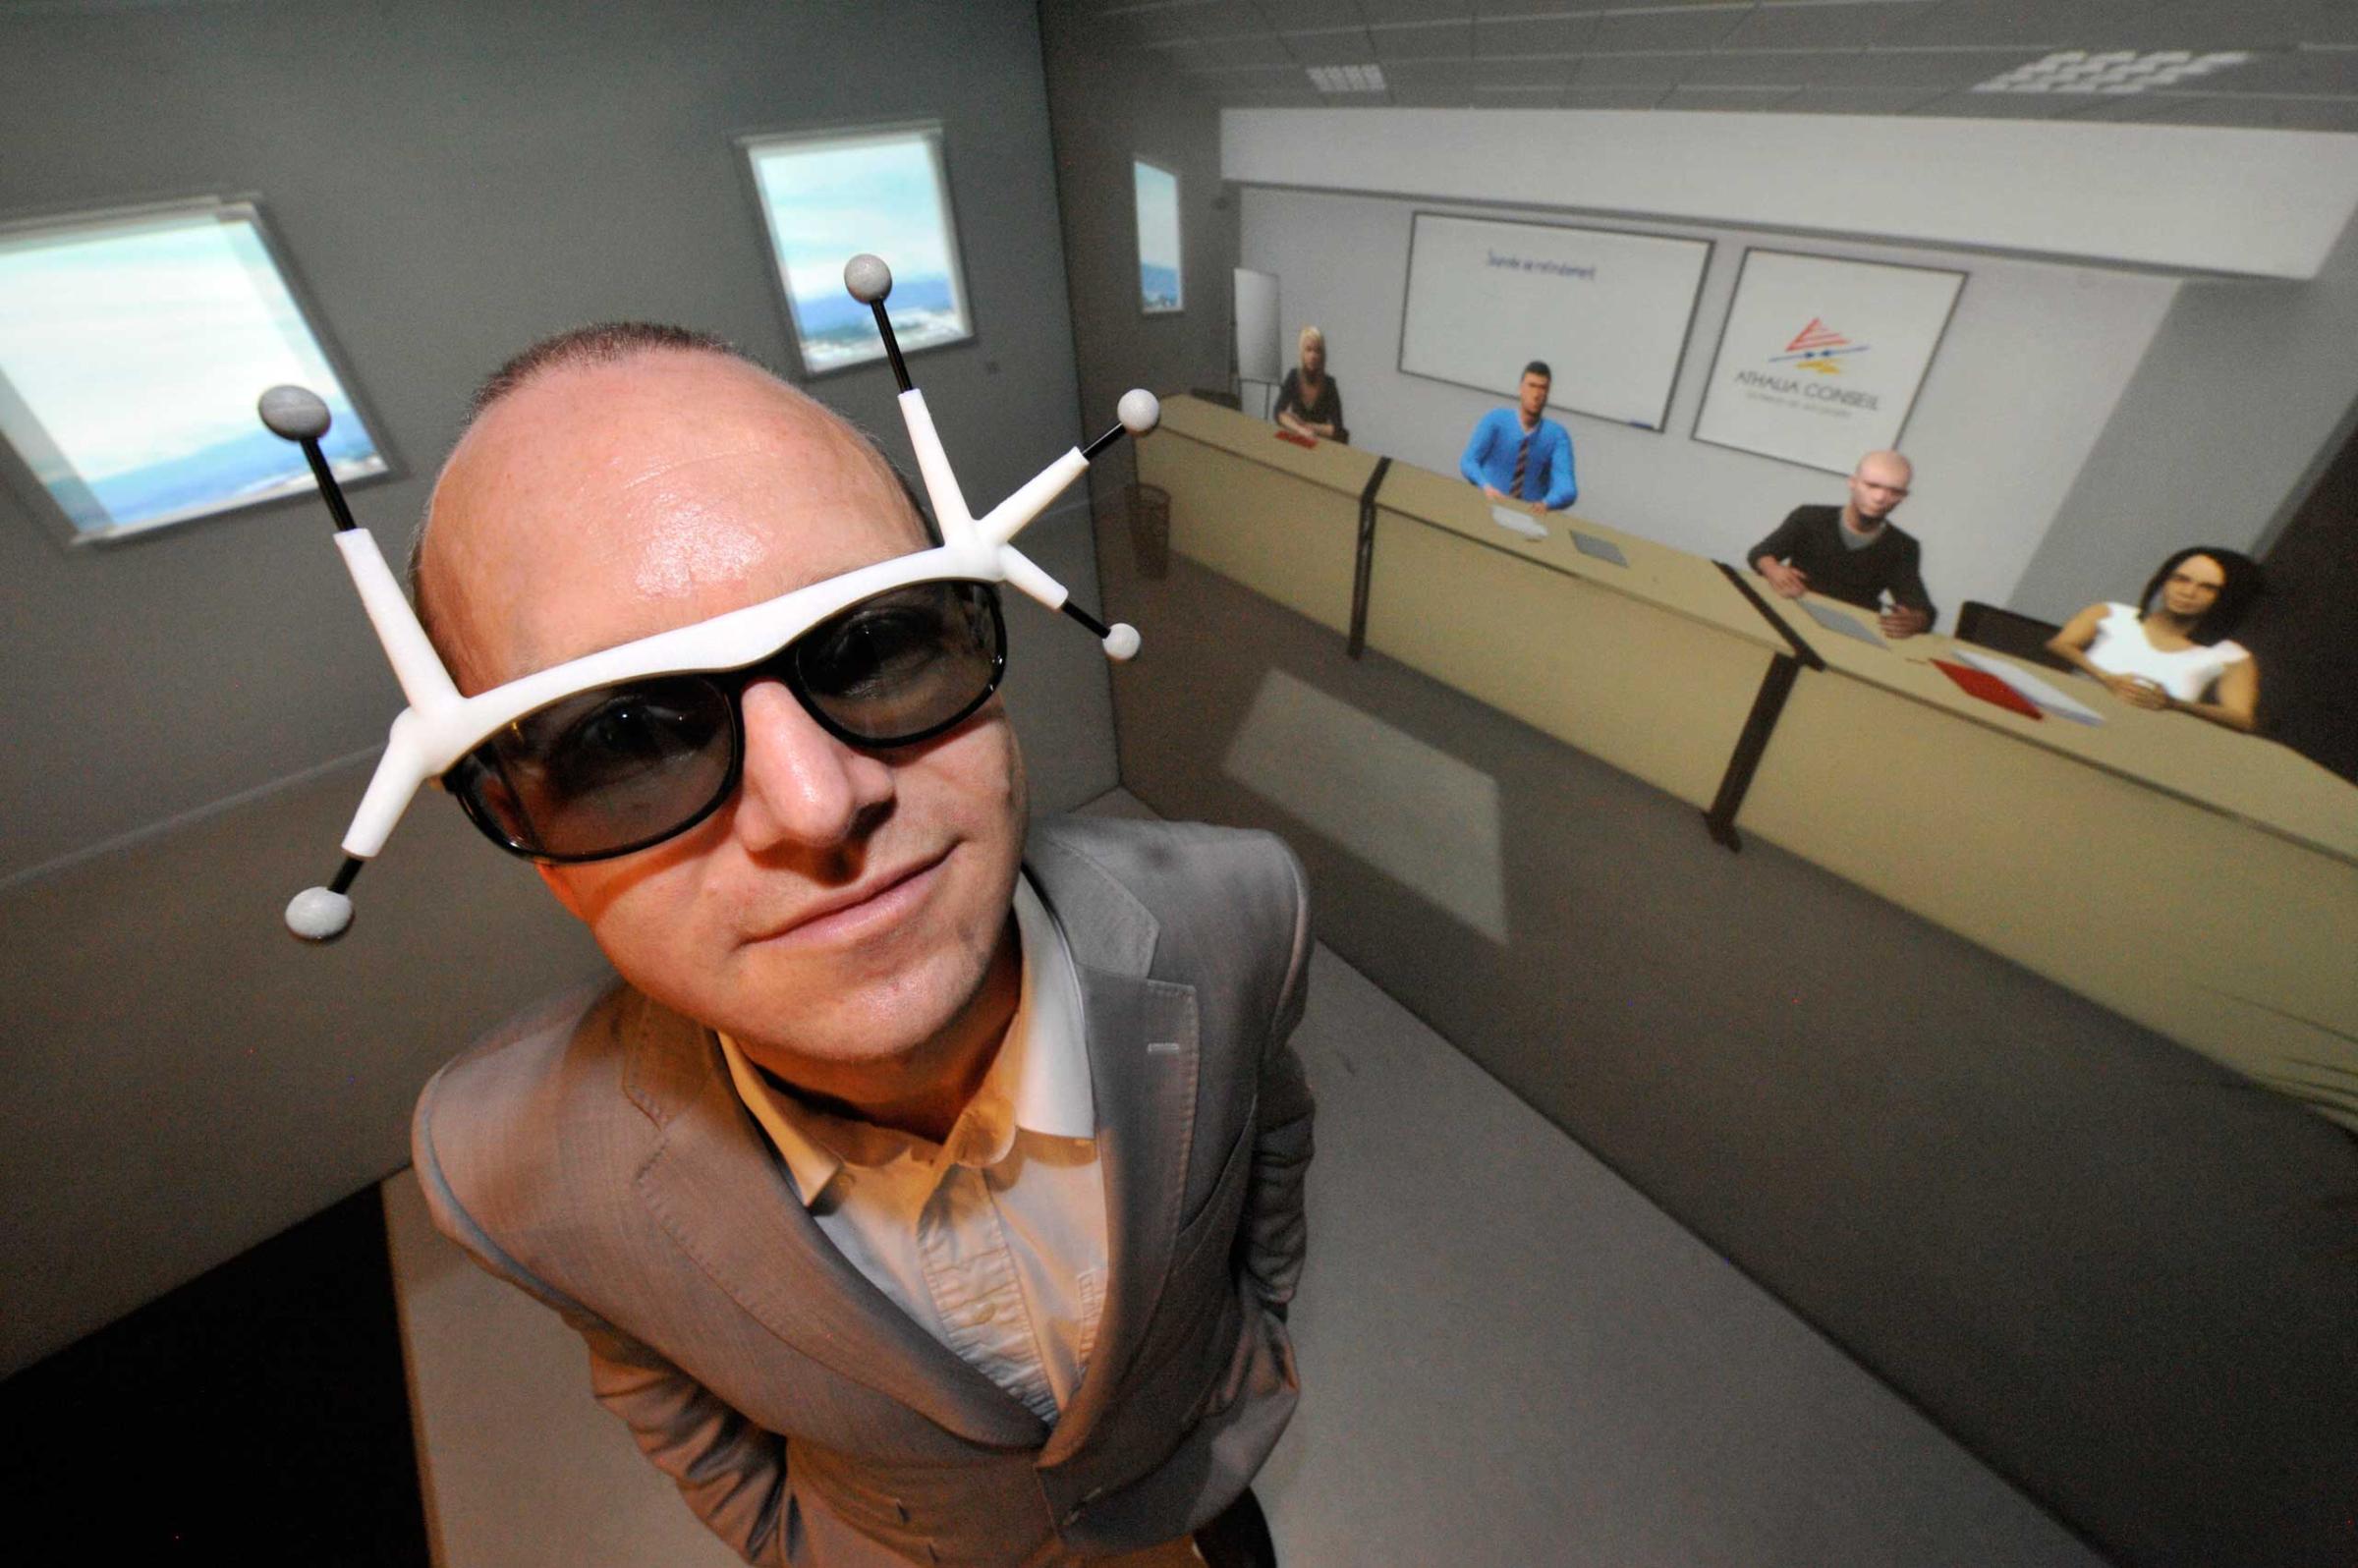 A man seeking a job was equipped with 3D spectacles with sensors as he trained in Clermont-Ferrand, central France with avatars (background) in a virtual reality cube, at business incubator Pascalis.